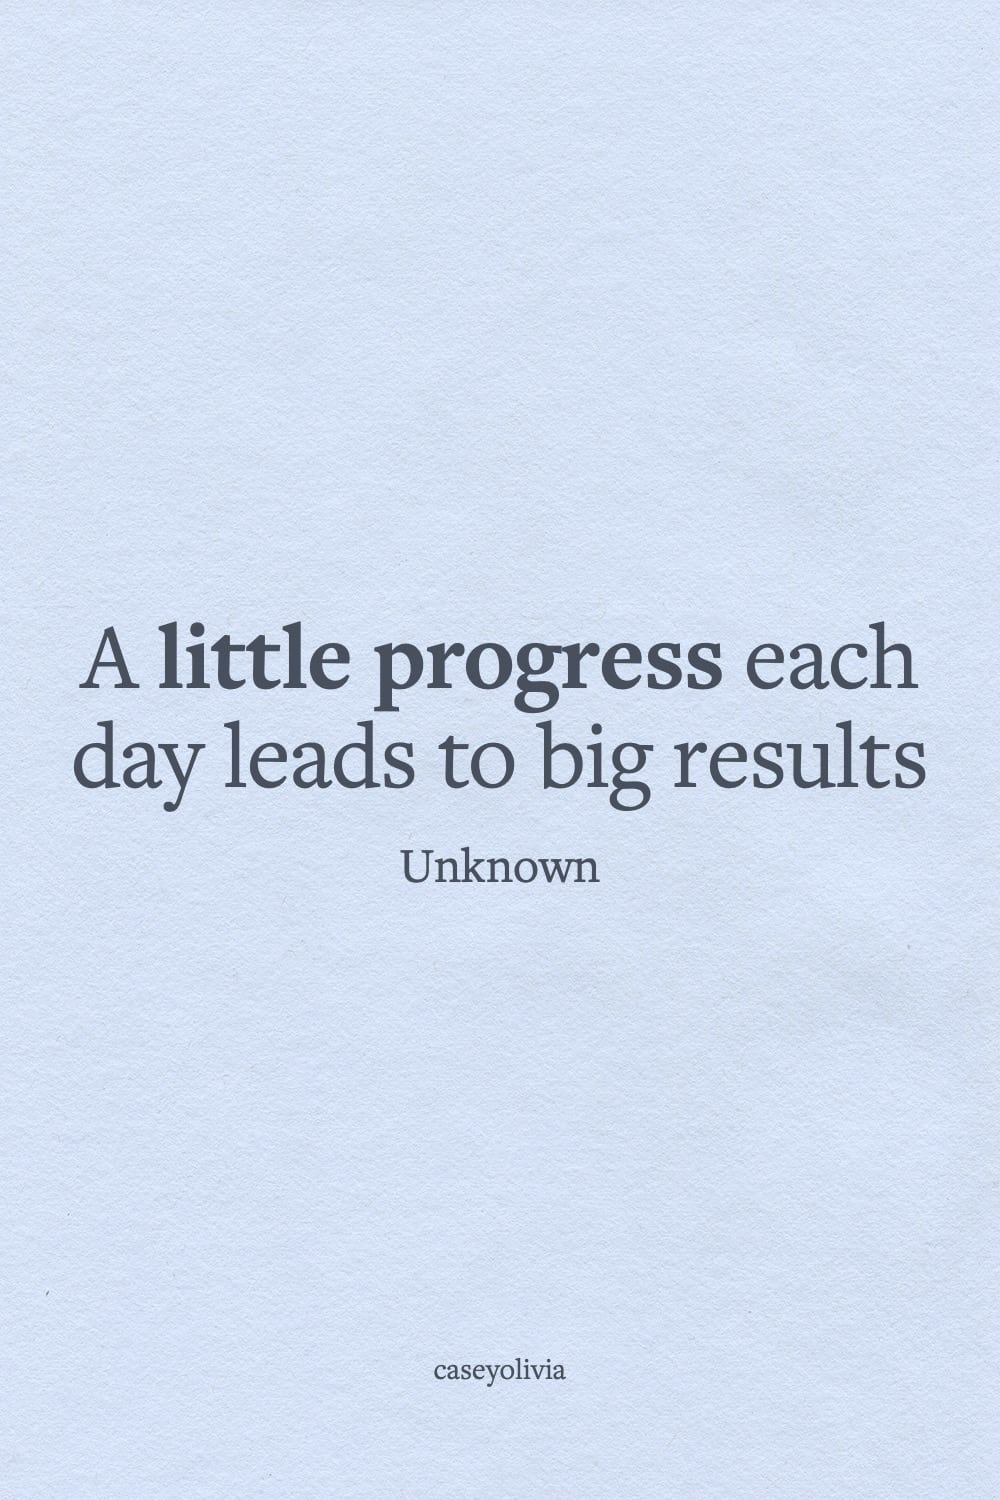 little progress to big results quote image for inspiration